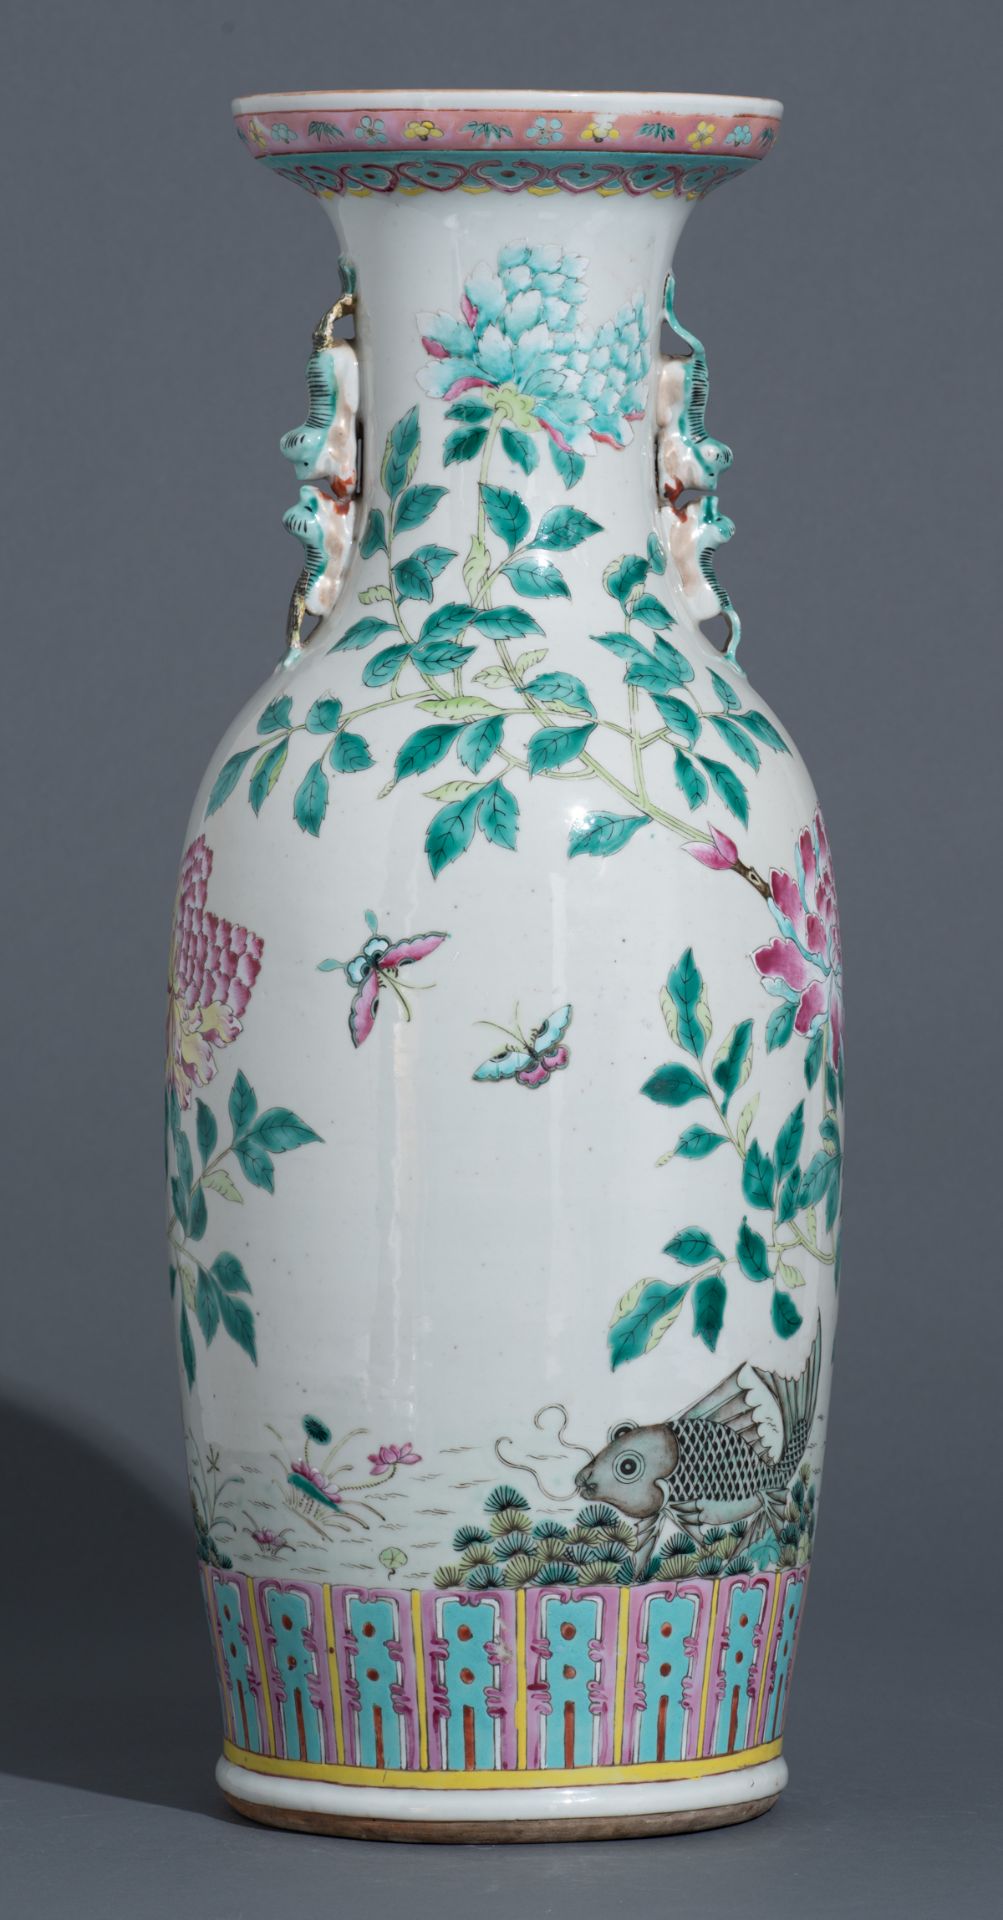 A Chinese famille rose vase, overall decorated with flowers, butterflies and carps, 19thC, H 61 cm - Image 4 of 7